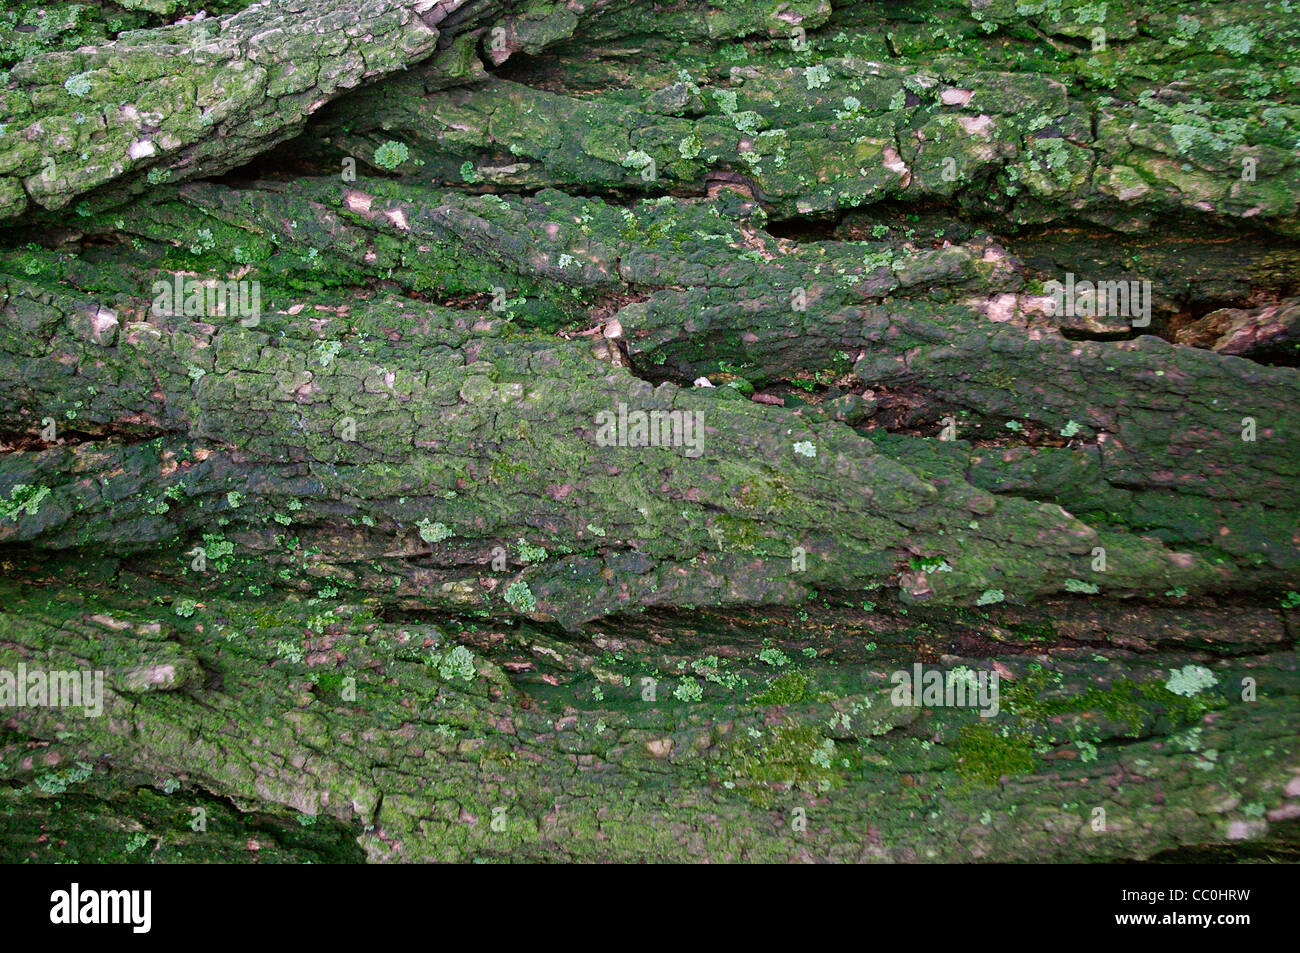 Closeup of lichen and moss on aged Black Locust (Robinia pseudoacacia L) tree deeply craggy rough bark and green lichen and moss Stock Photo